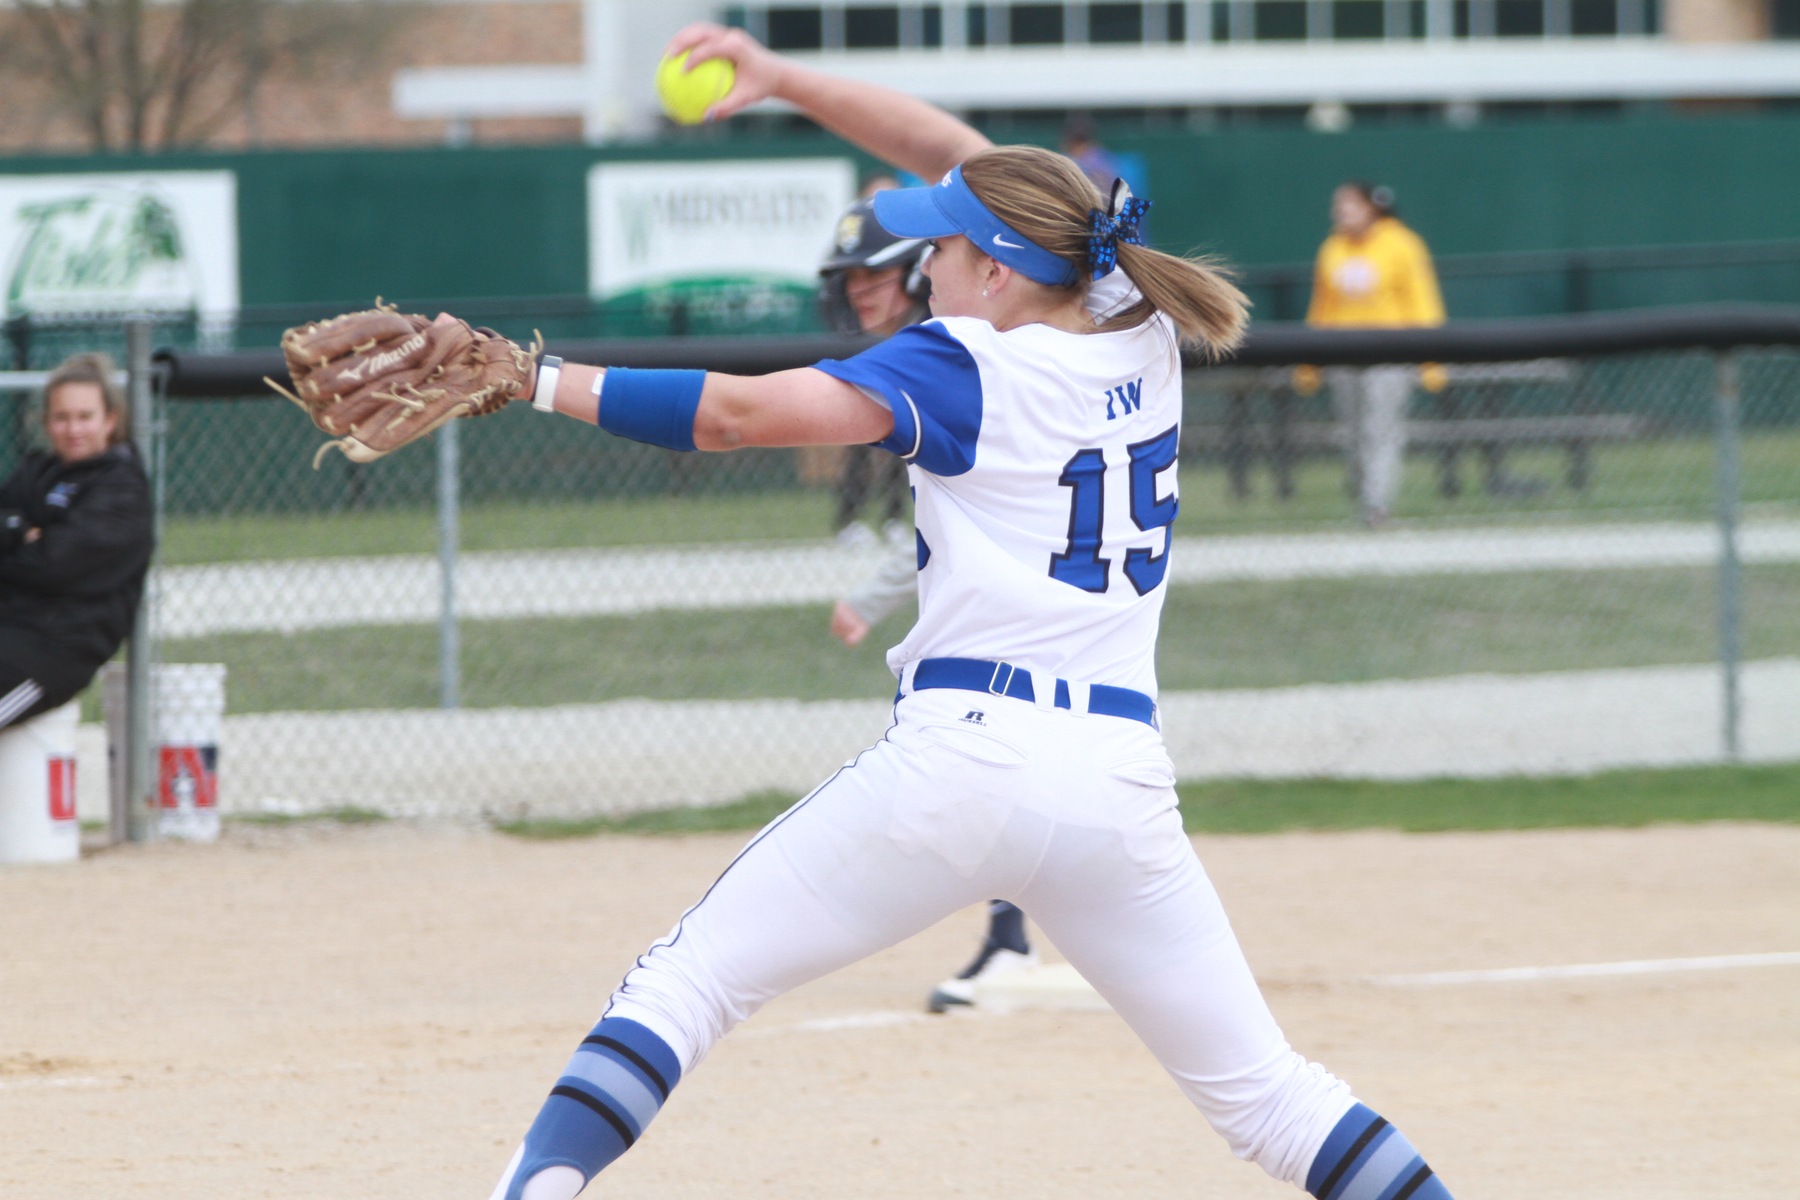 Hicks rakes in All-American honors, earns NJCAA, NFCA, FPN recognition, Gregory named to NFCA All-Midwest squad